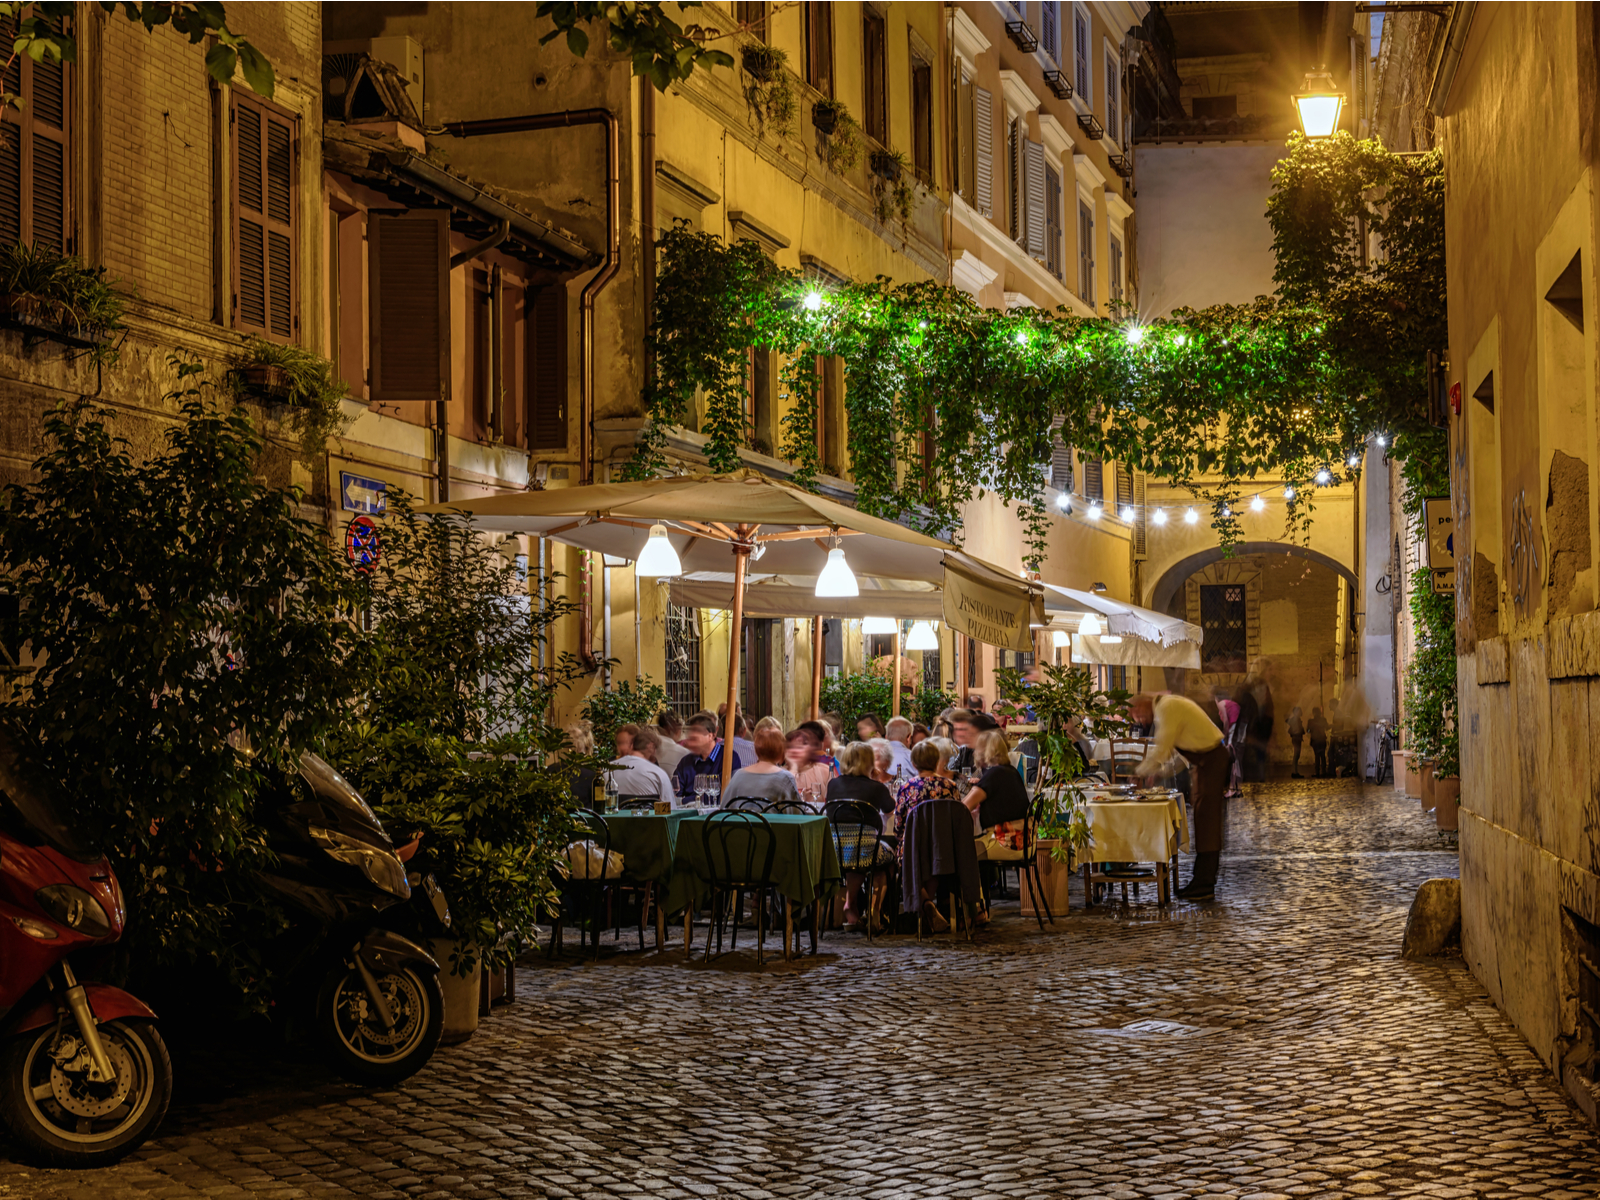 Night view of a cozy street in Trastevere during the cheapest time to visit Rome